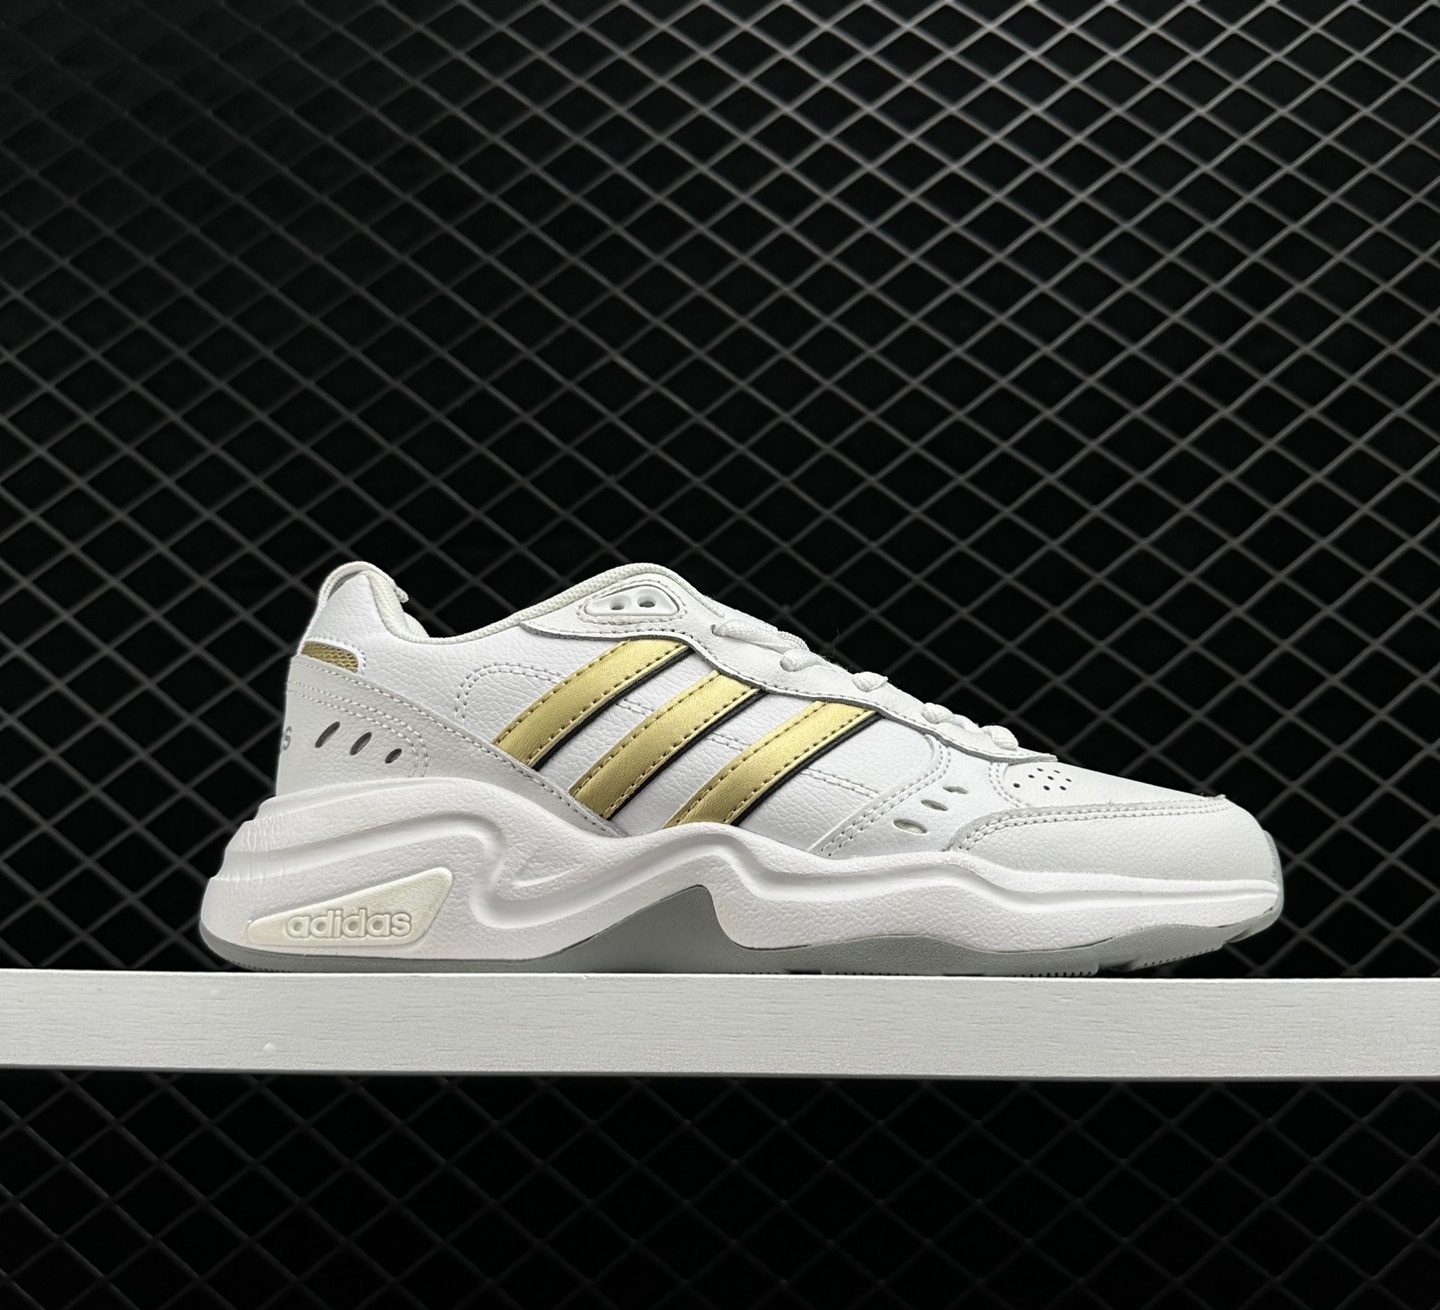 Adidas neo Strutter 'White Gold' GX0671 | Premium Sneaker for Style Conscious Shoppers